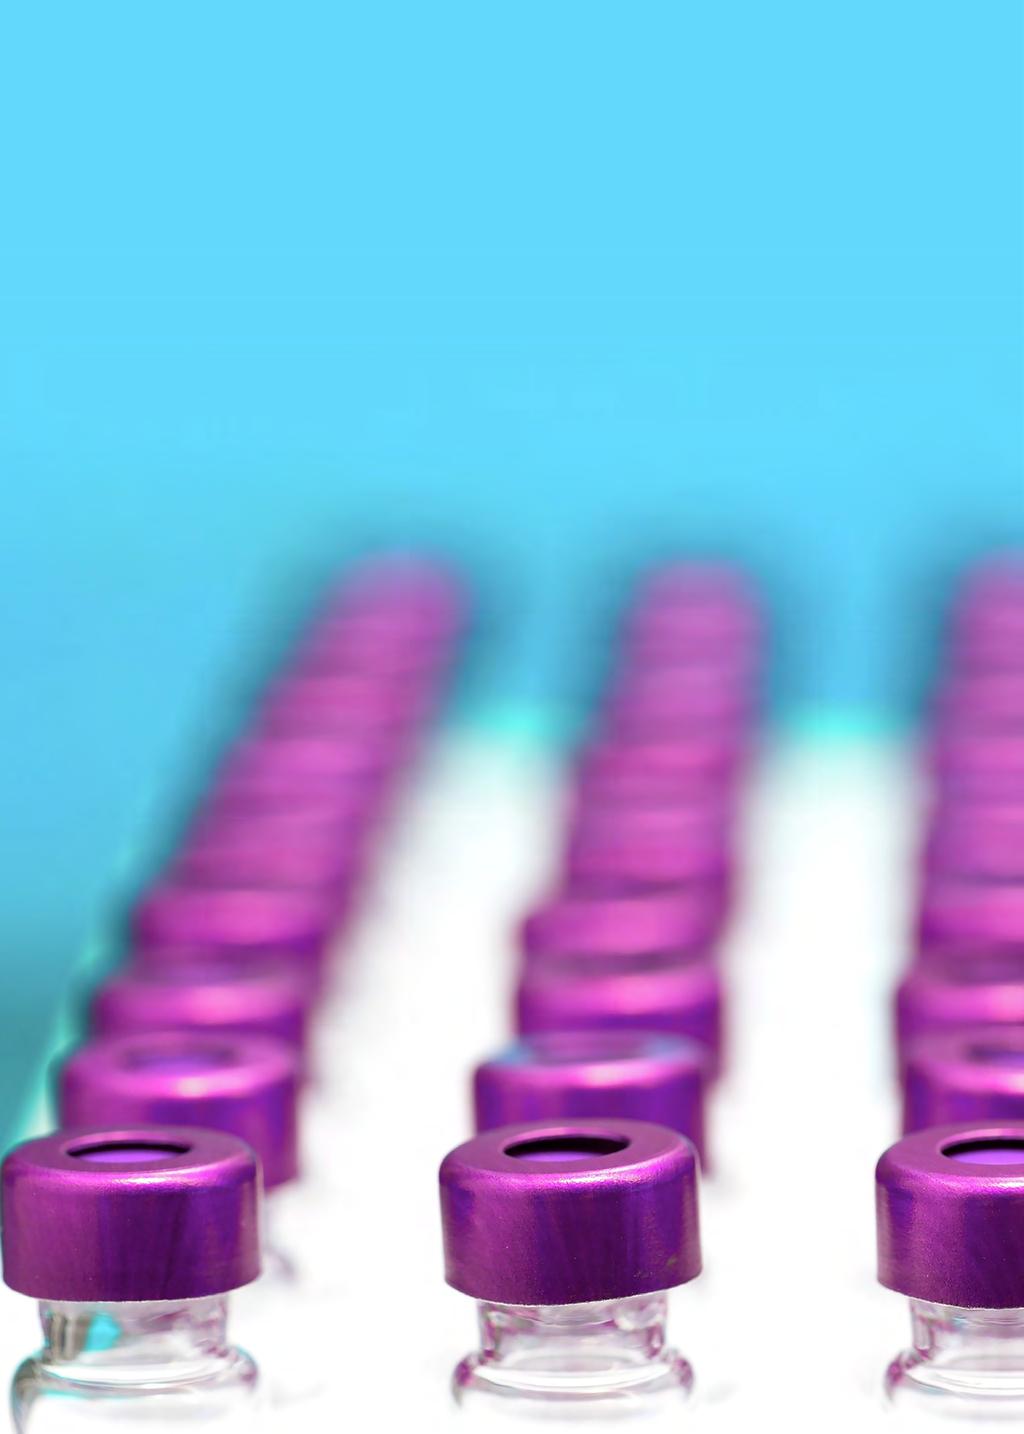 Our four core offerings Custom Pharma Solutions Our Custom Pharma Solutions offering provides a full range of bespoke drug development, scale-up and manufacturing services, through pre-clinical and